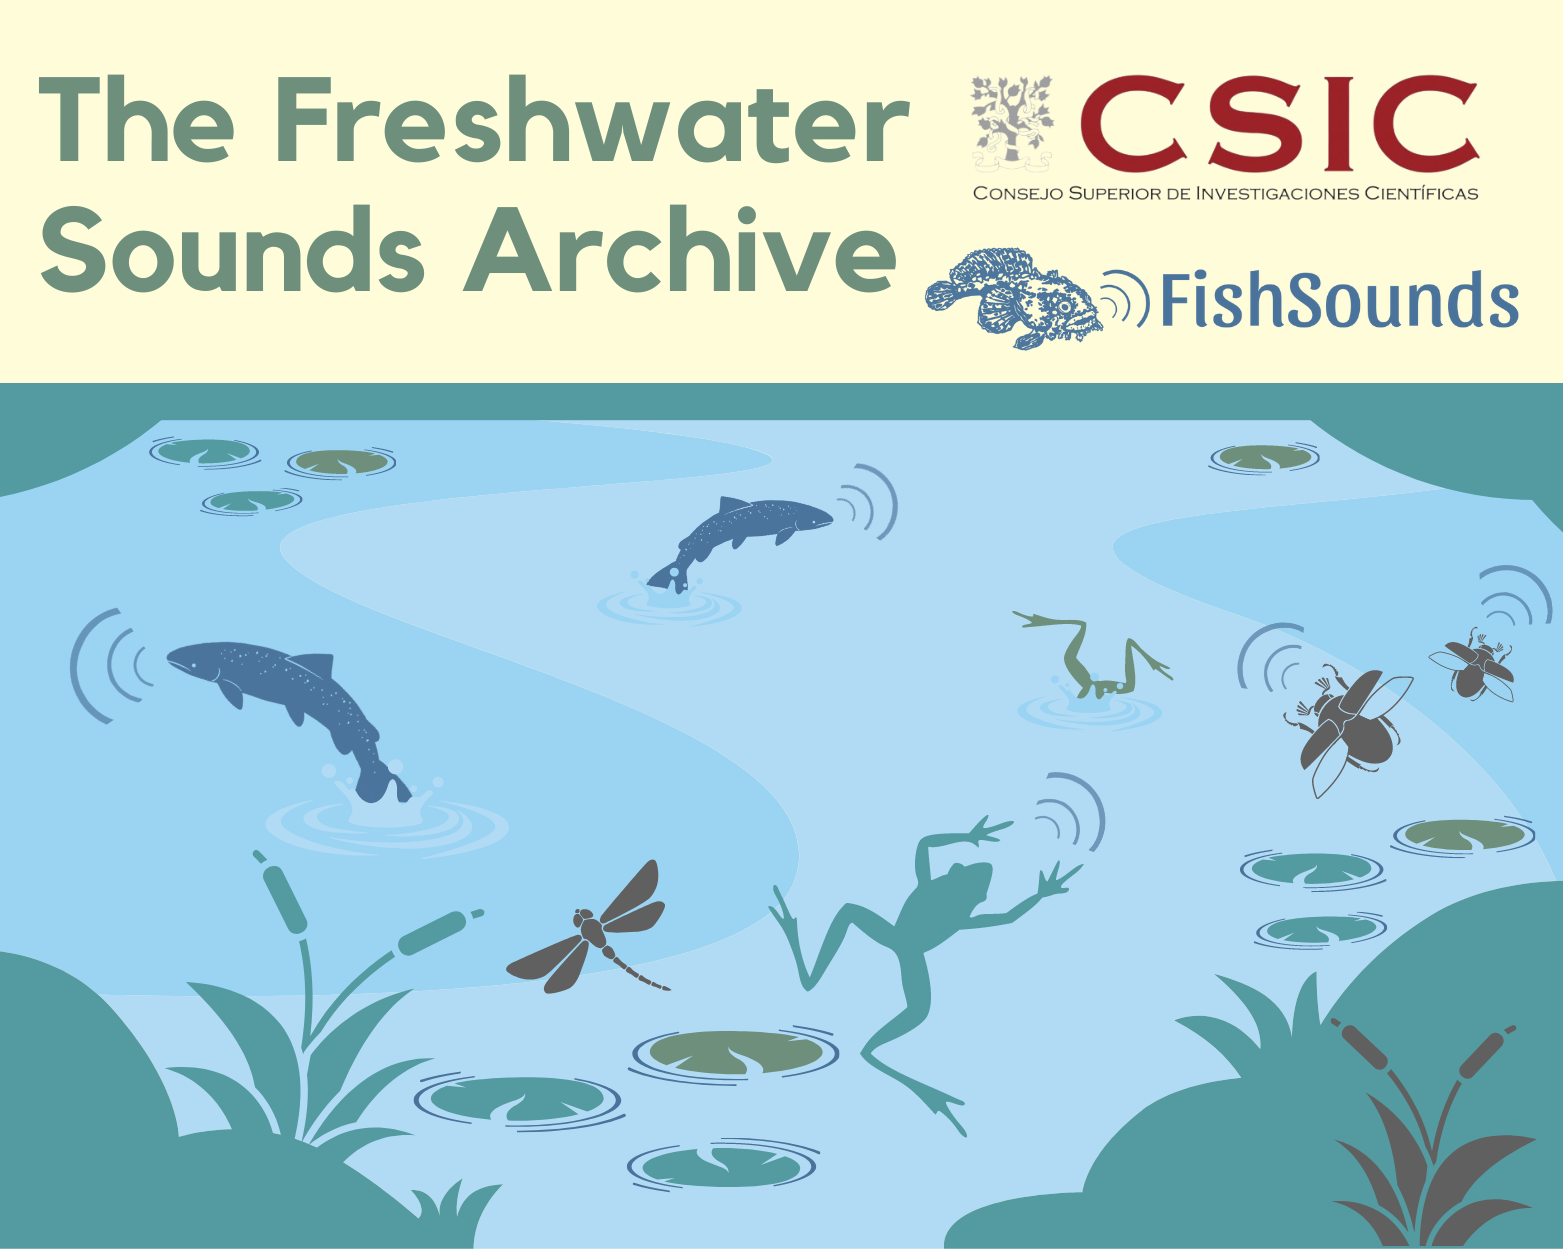 The Freshwater Sound Archive